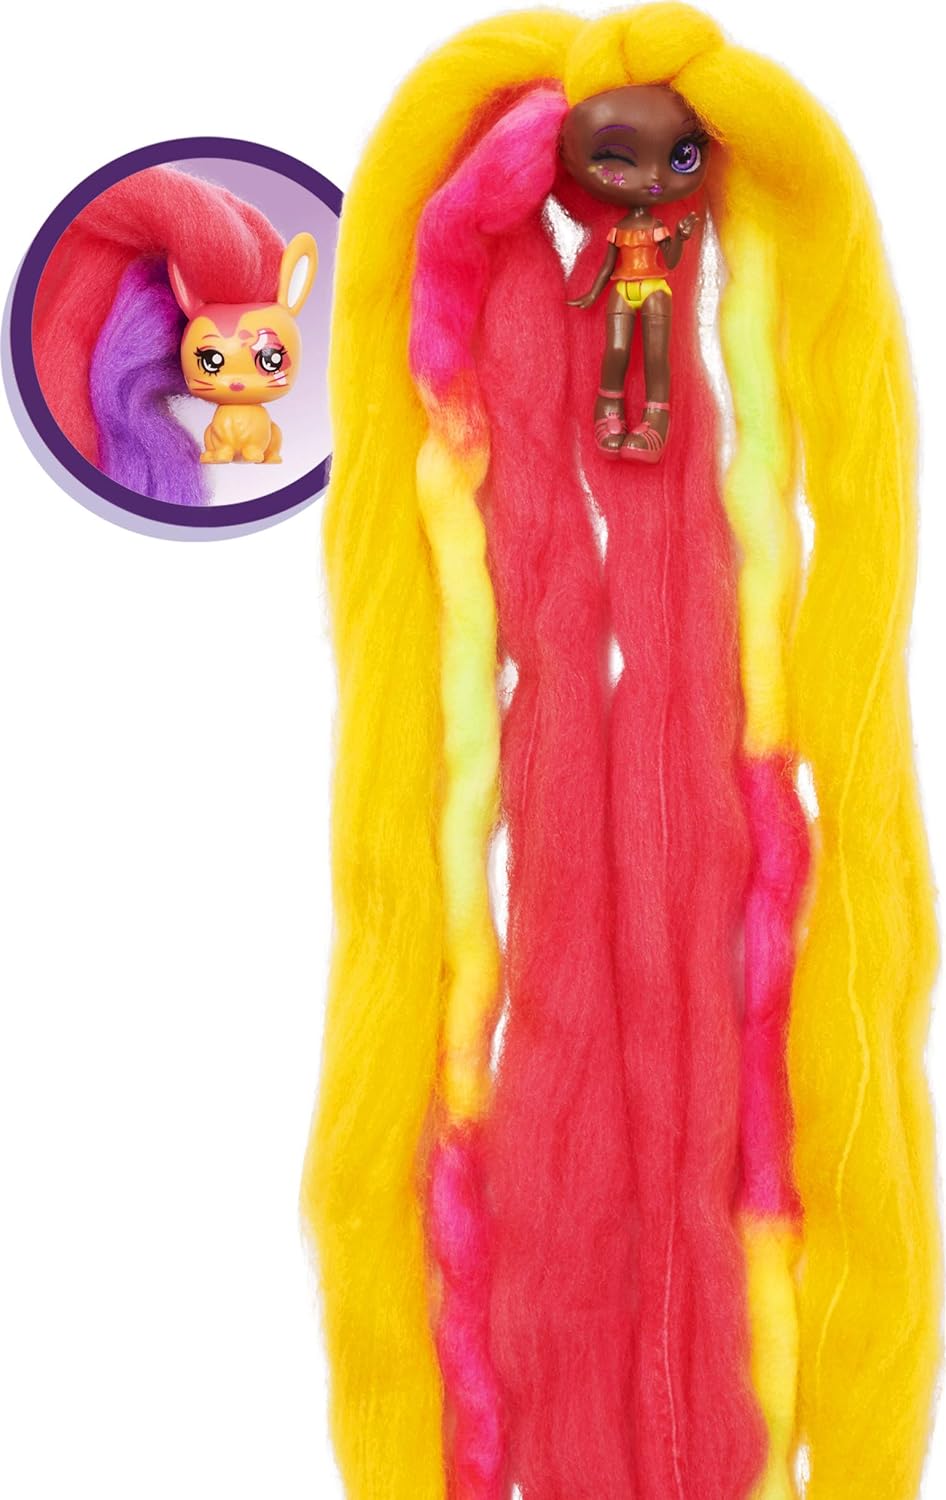 Candy Locks Margo Punch Doll With Pet